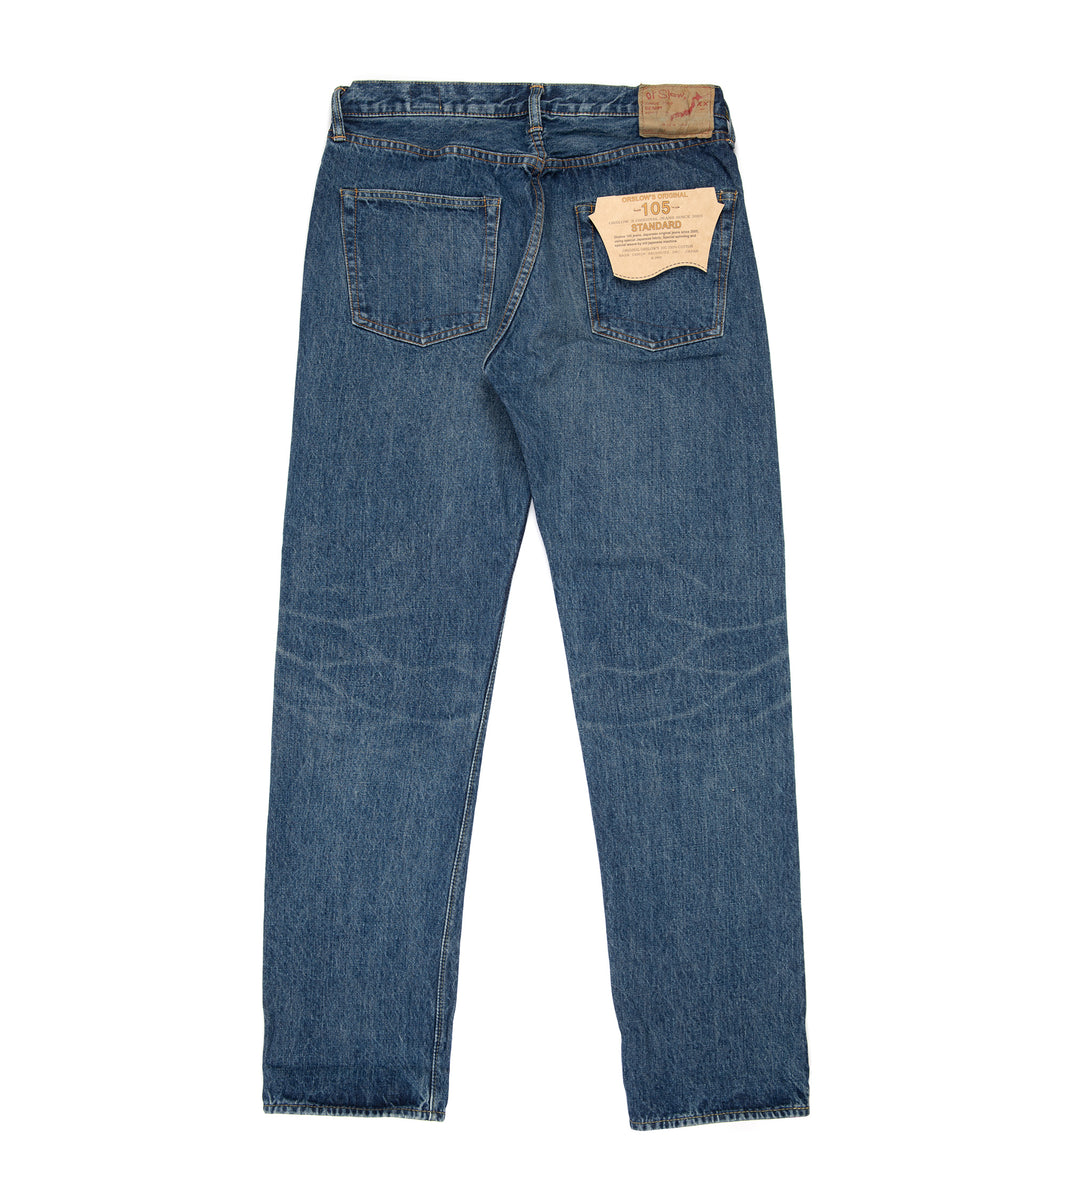 OrSlow 105 Standard Fit Selvedge Denim: 2 Year Wash – Trunk Clothiers